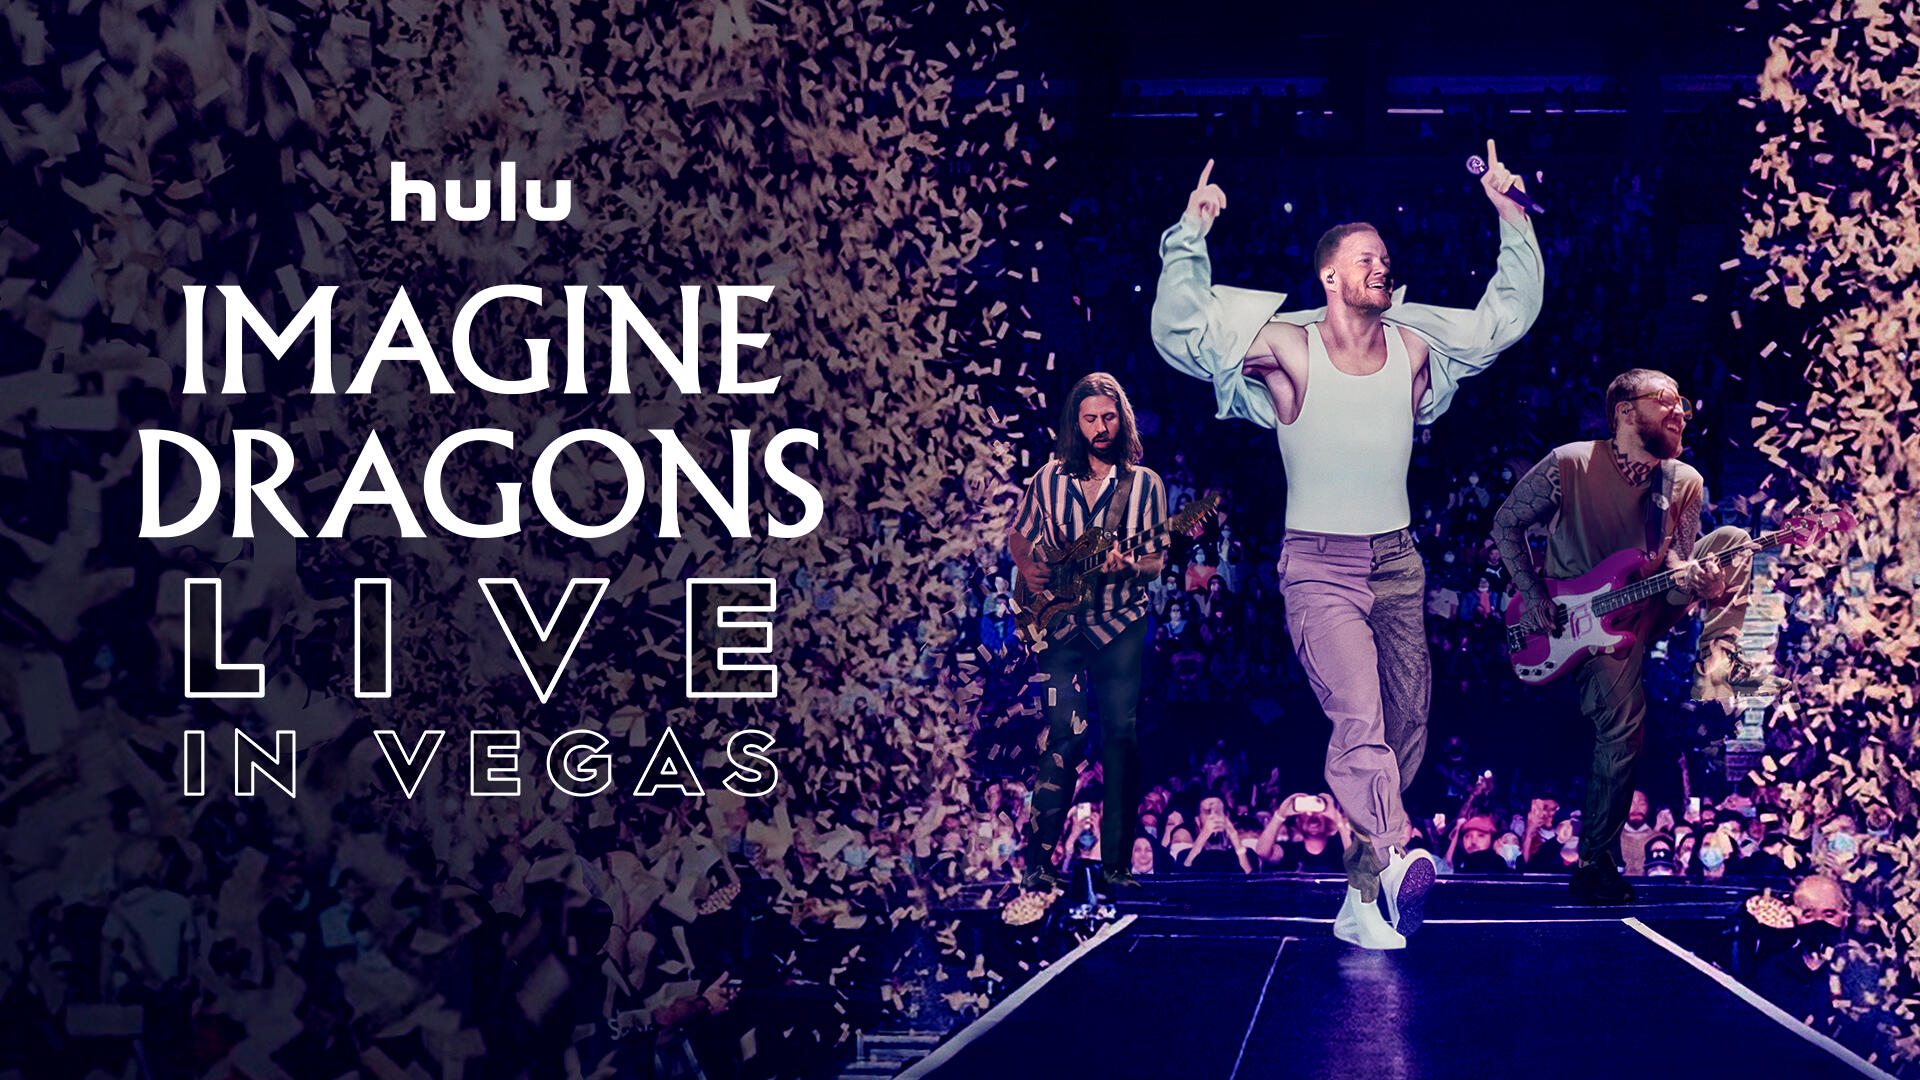 Imagine Dragons Live in Vegas -- Far from the days of playing in dive bars and casinos across the Las Vegas Strip, Imagine Dragons returns home to perform at the city’s largest stage, Allegiant Stadium, in a triumphant concert film that showcases the band's rise to fame and the city that helped shape their sound. (Courtesy of Hulu)